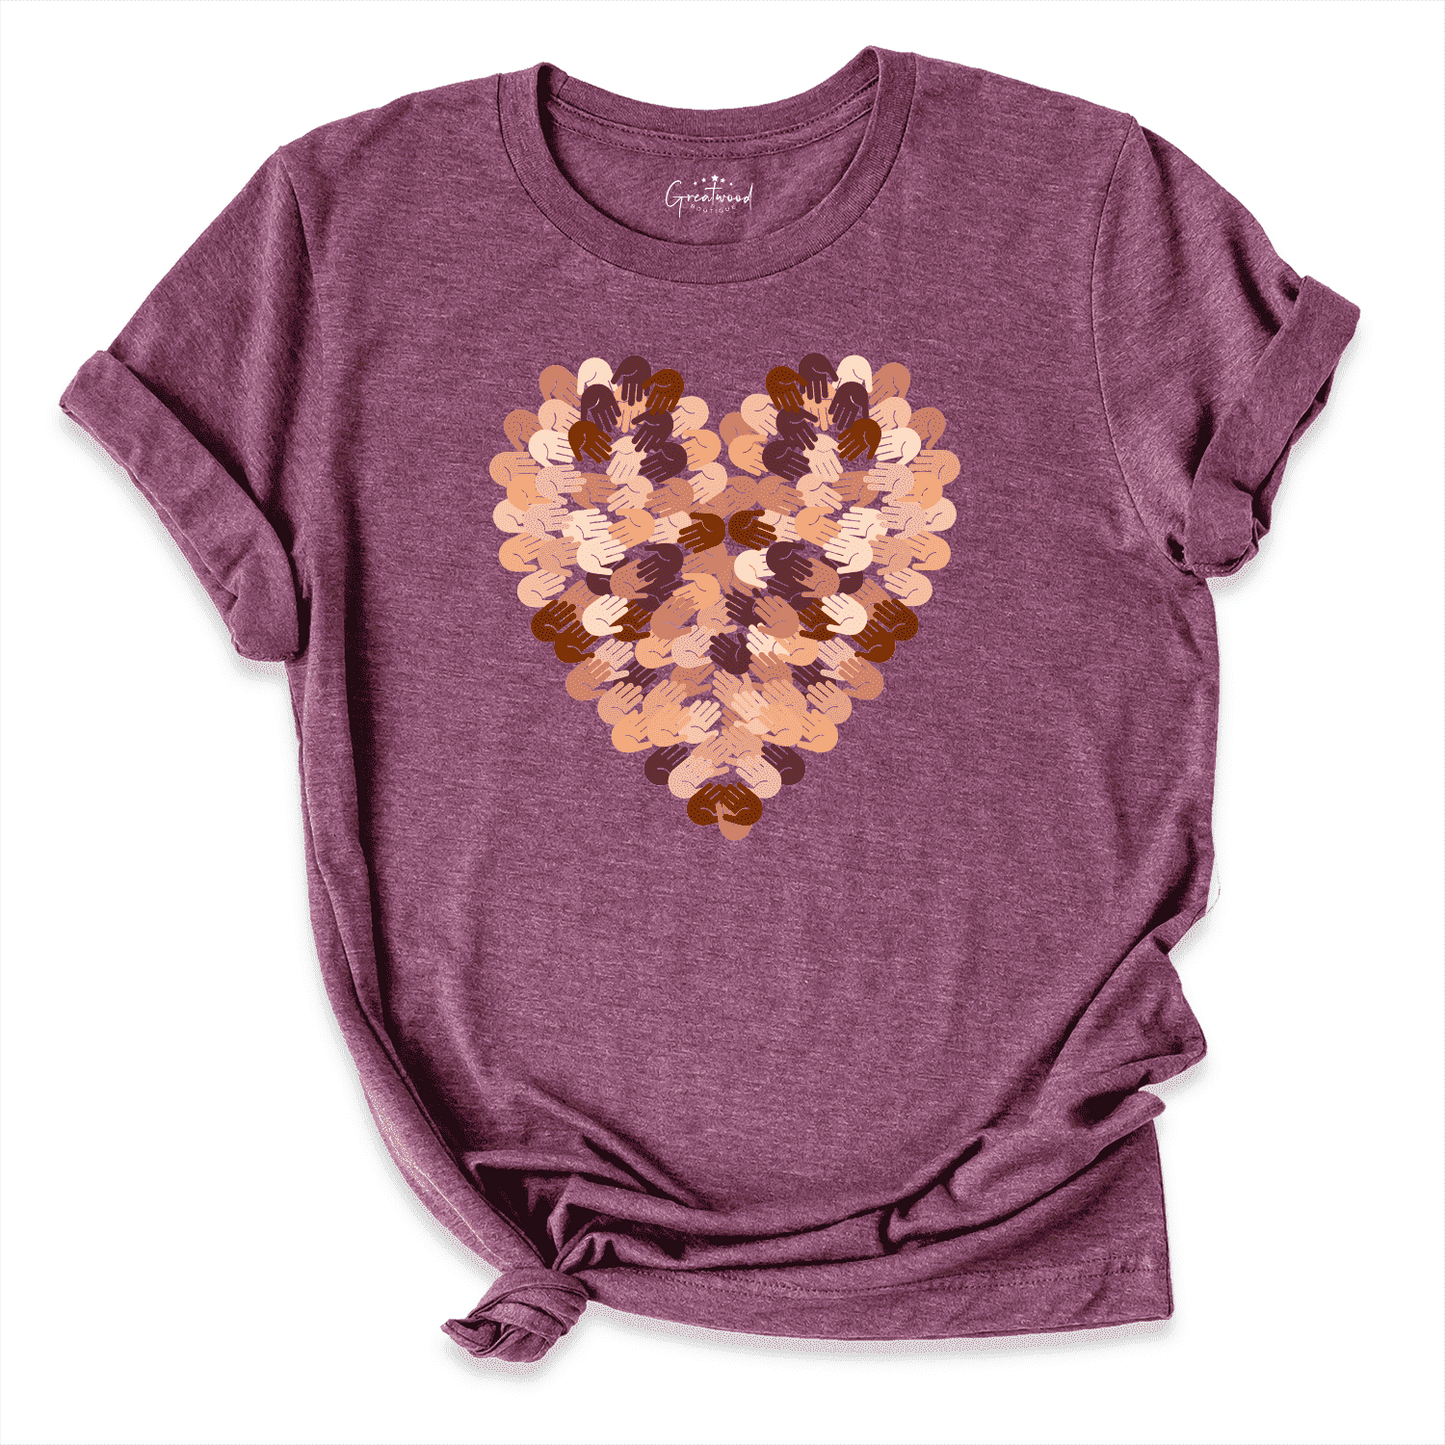 Heart With Hands Shirt Maroon - Greatwood Boutique